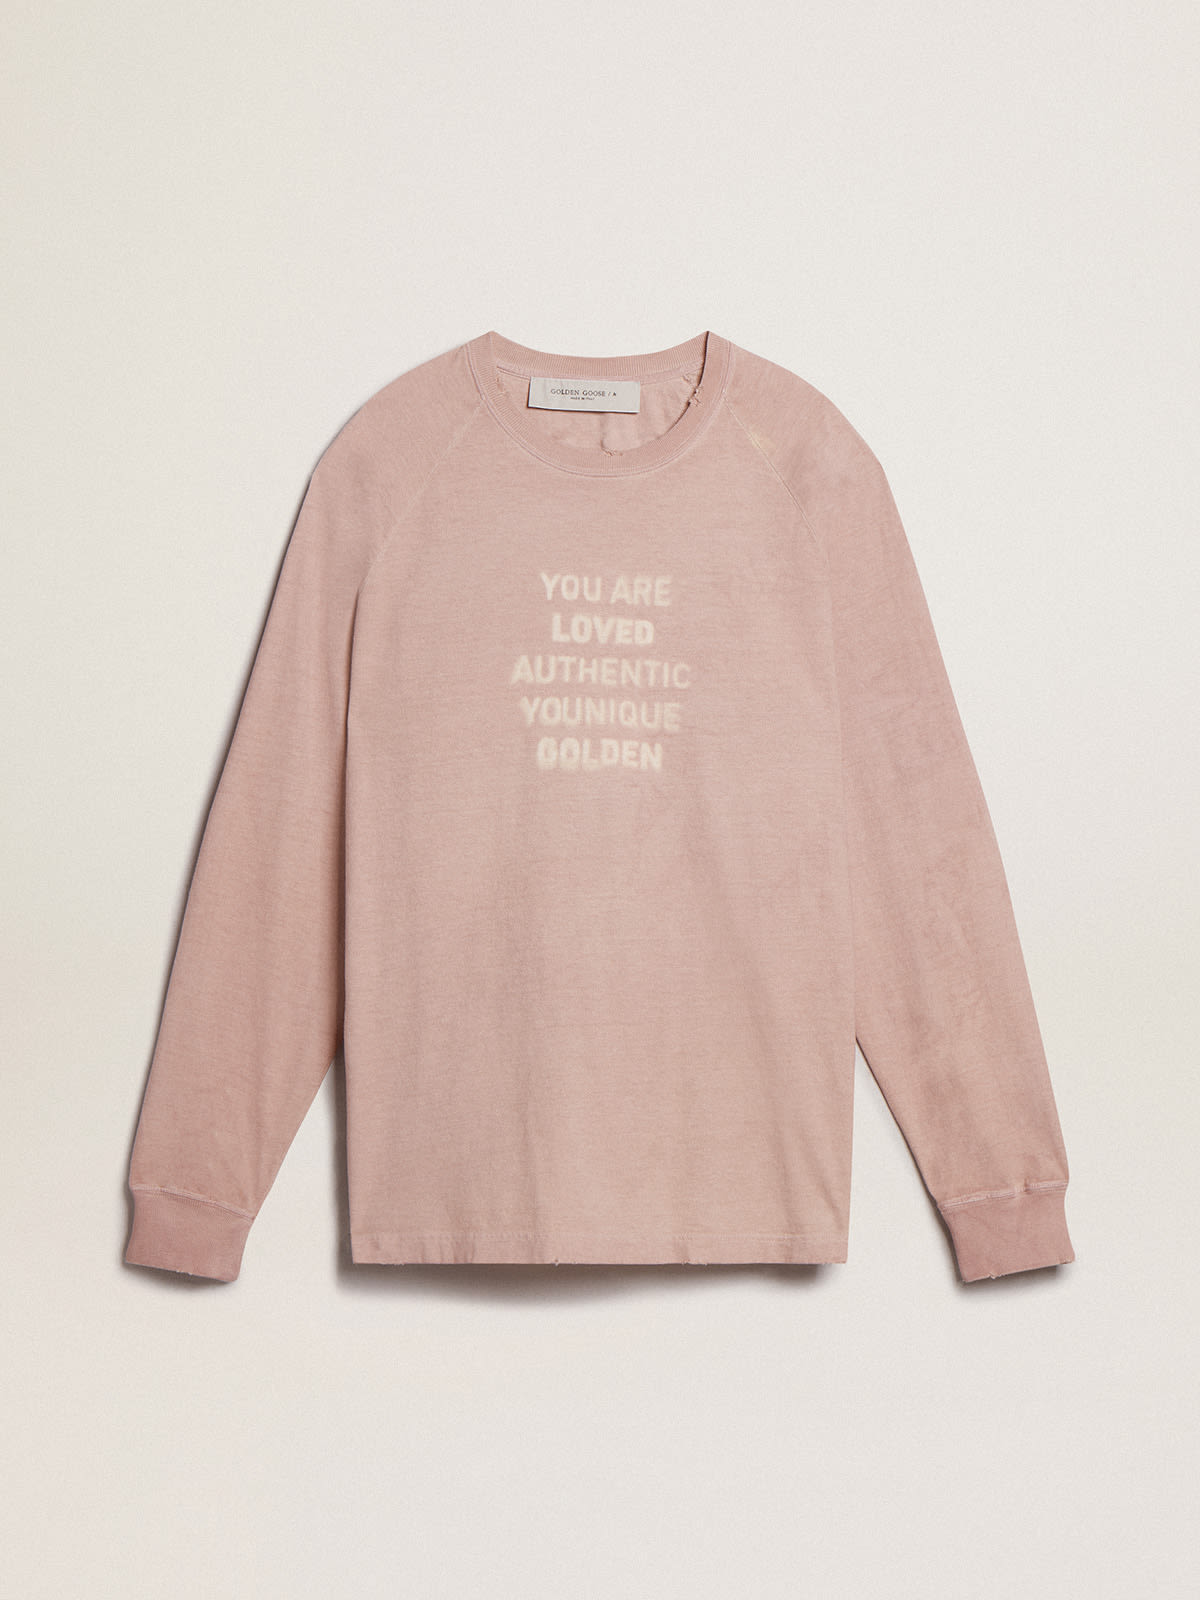 Golden Goose - Powder-pink T-shirt with white lettering on the front in 